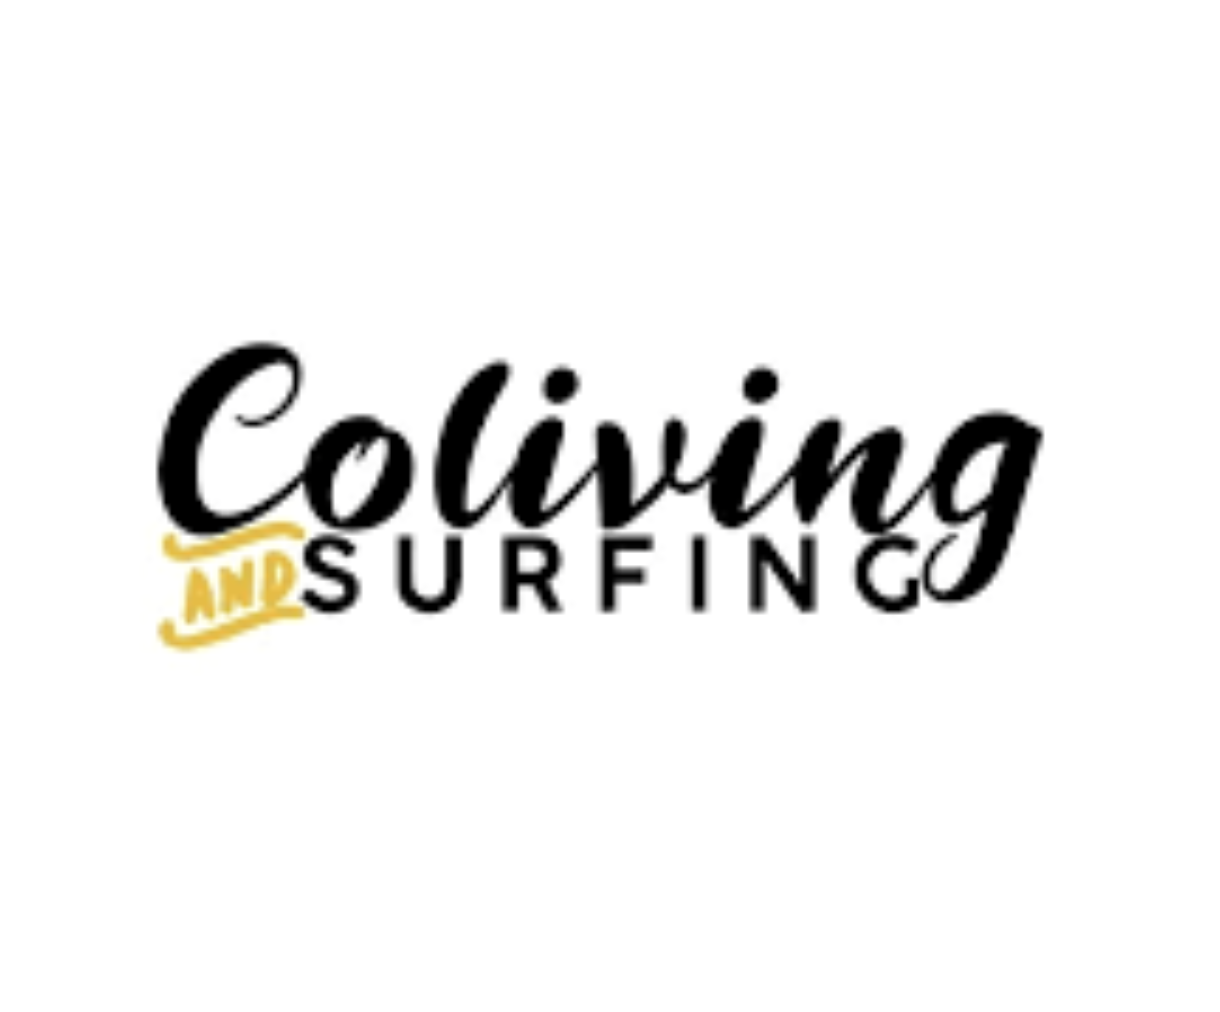 Coliving & Surfing